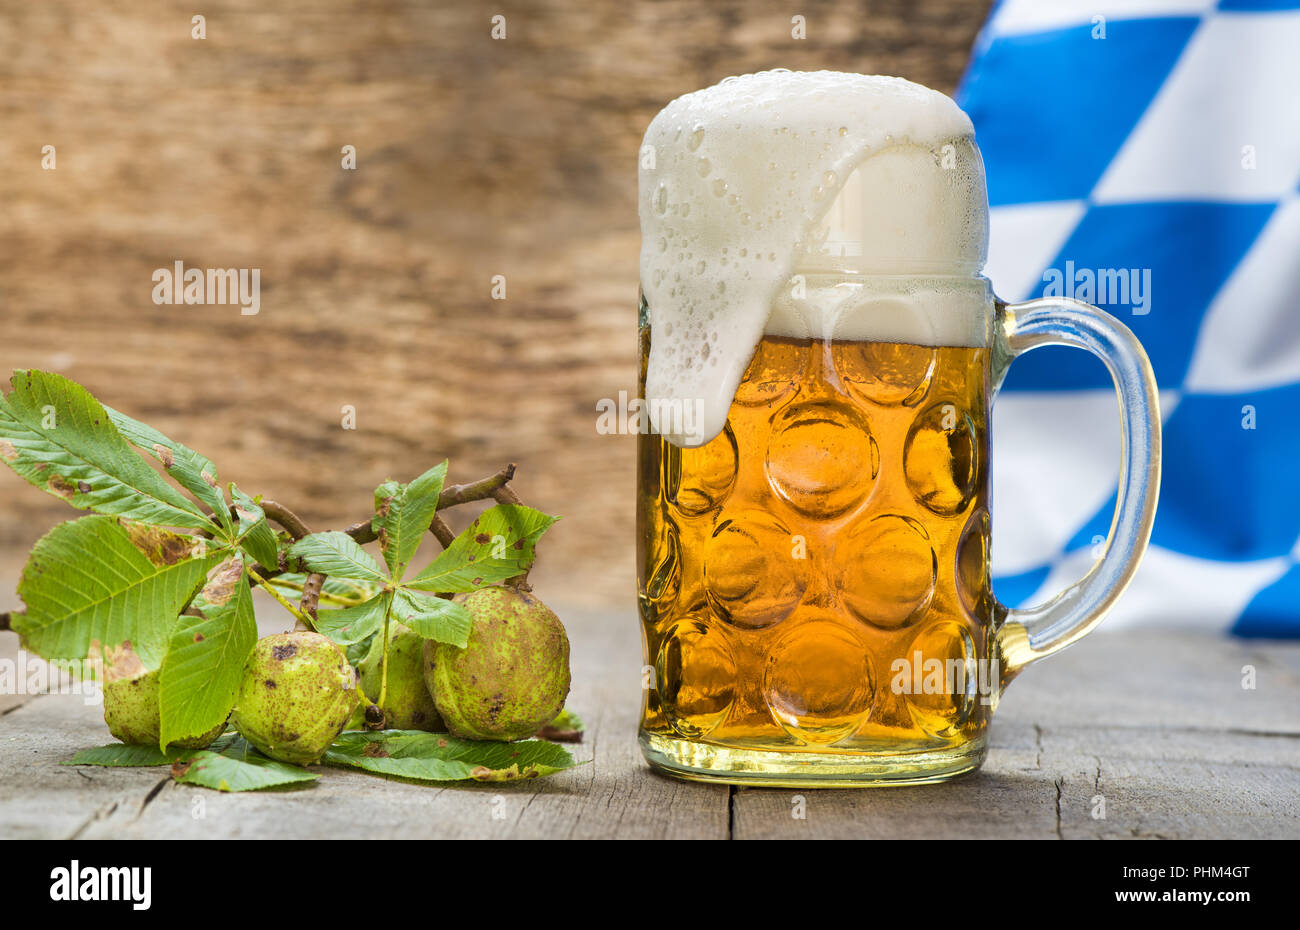 big glass filled with Bavarian lager beer Stock Photo